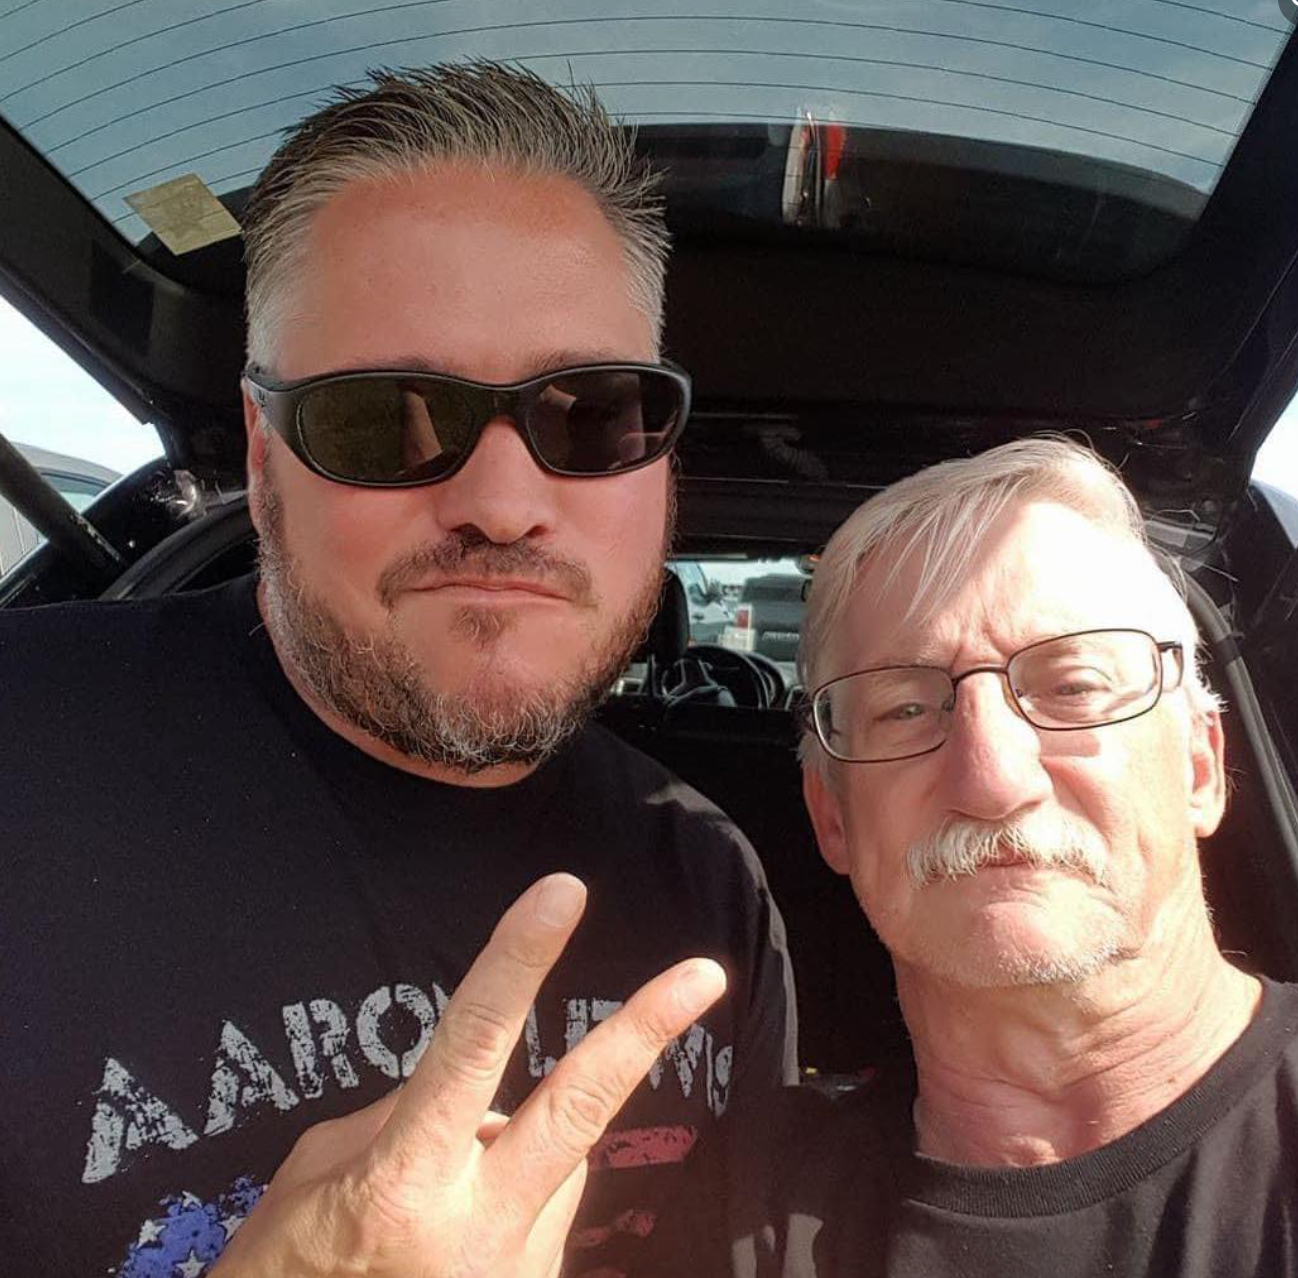 Thomas Giberti, 69, right, was shot seven times at Just-In-Time bowling alley and miraculously left the hospital on Saturday, according to his nephew, Will Bourgalt, left